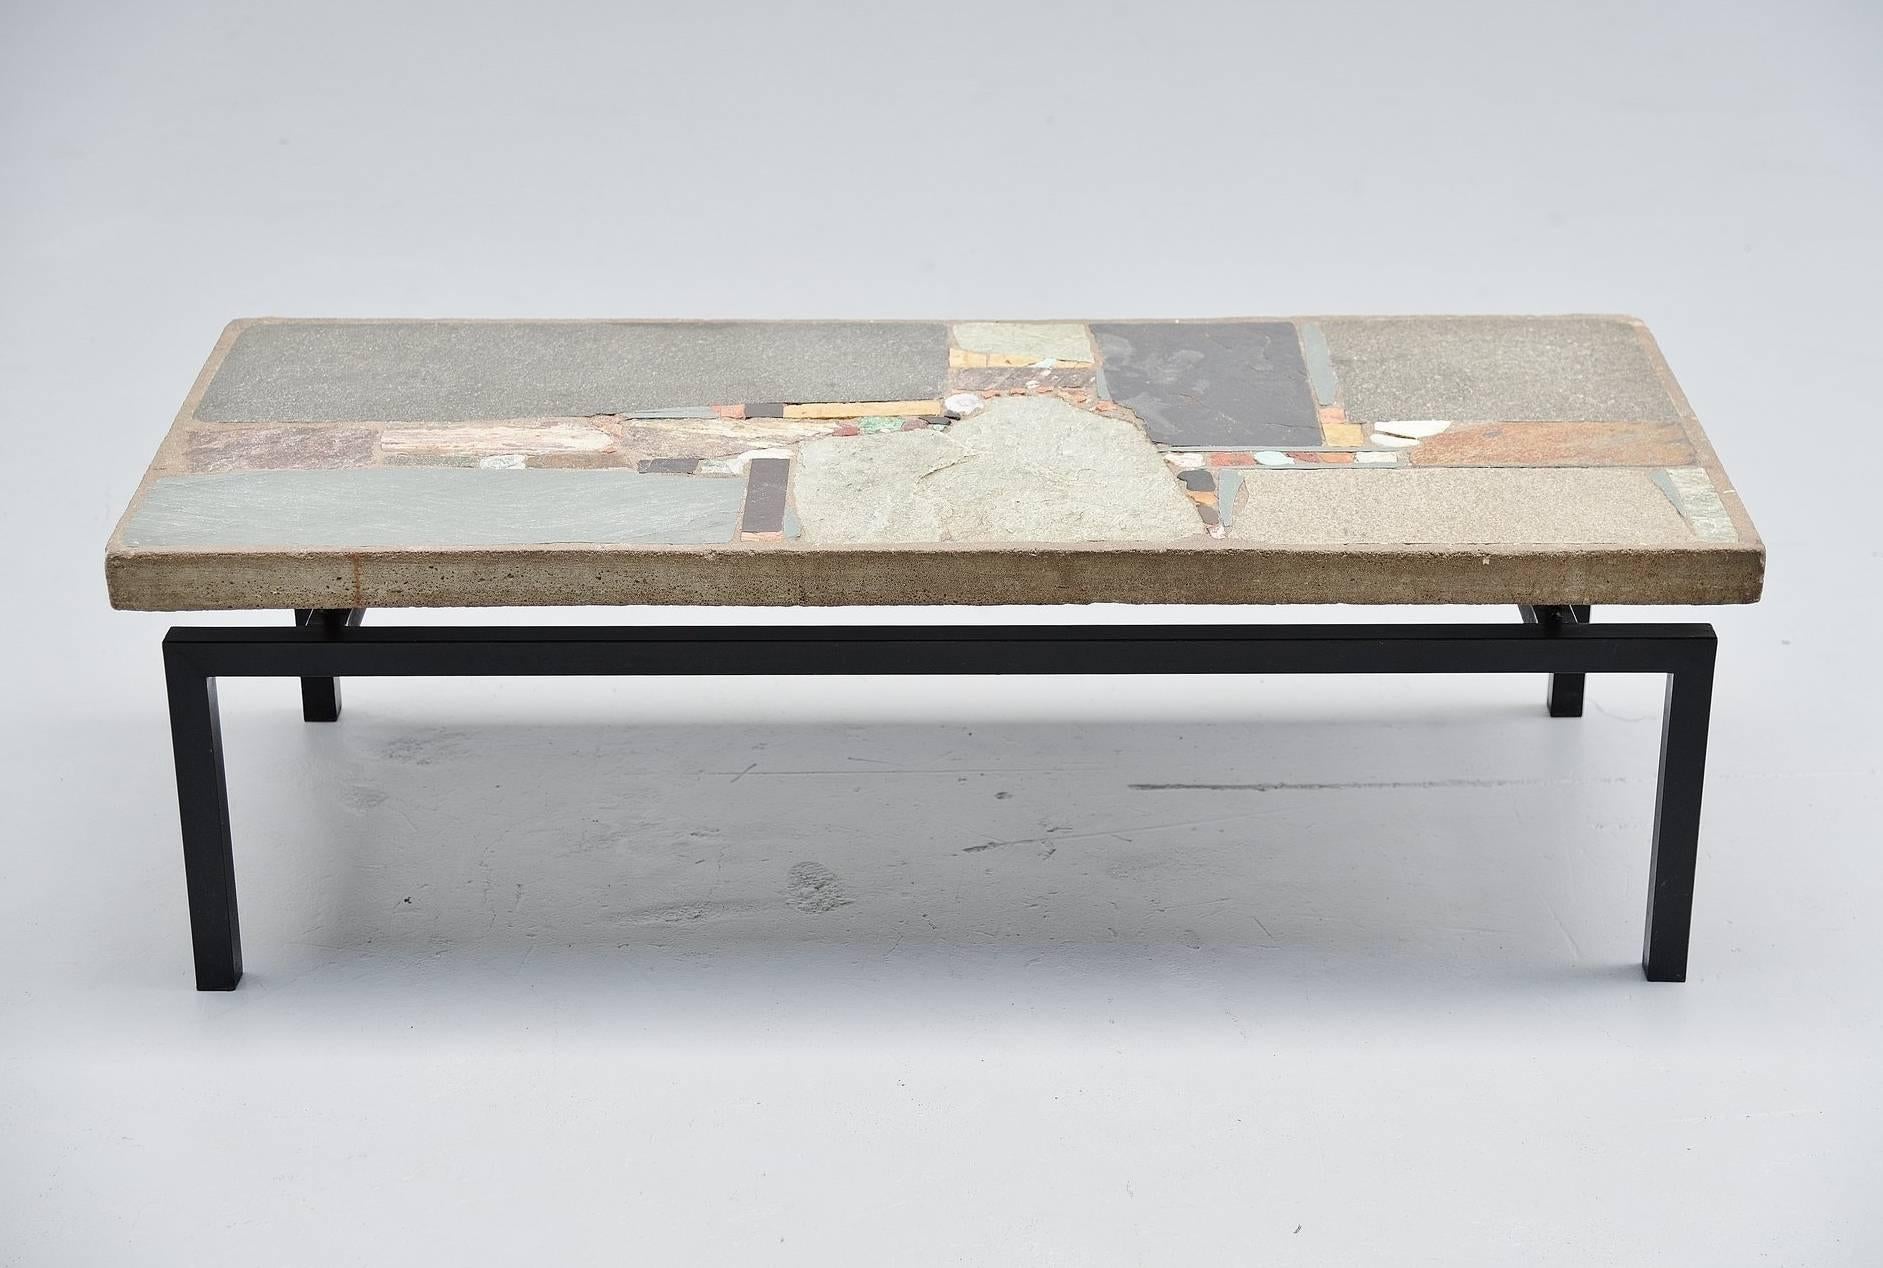 Rare and unique artwork coffee table designed and made by Rien Goené, Utrecht, 1958. Rien Goene was a Dutch artist, painter and sculptor who inspired his work on the Cobra movement that was founded in 1948. He started making tables together with